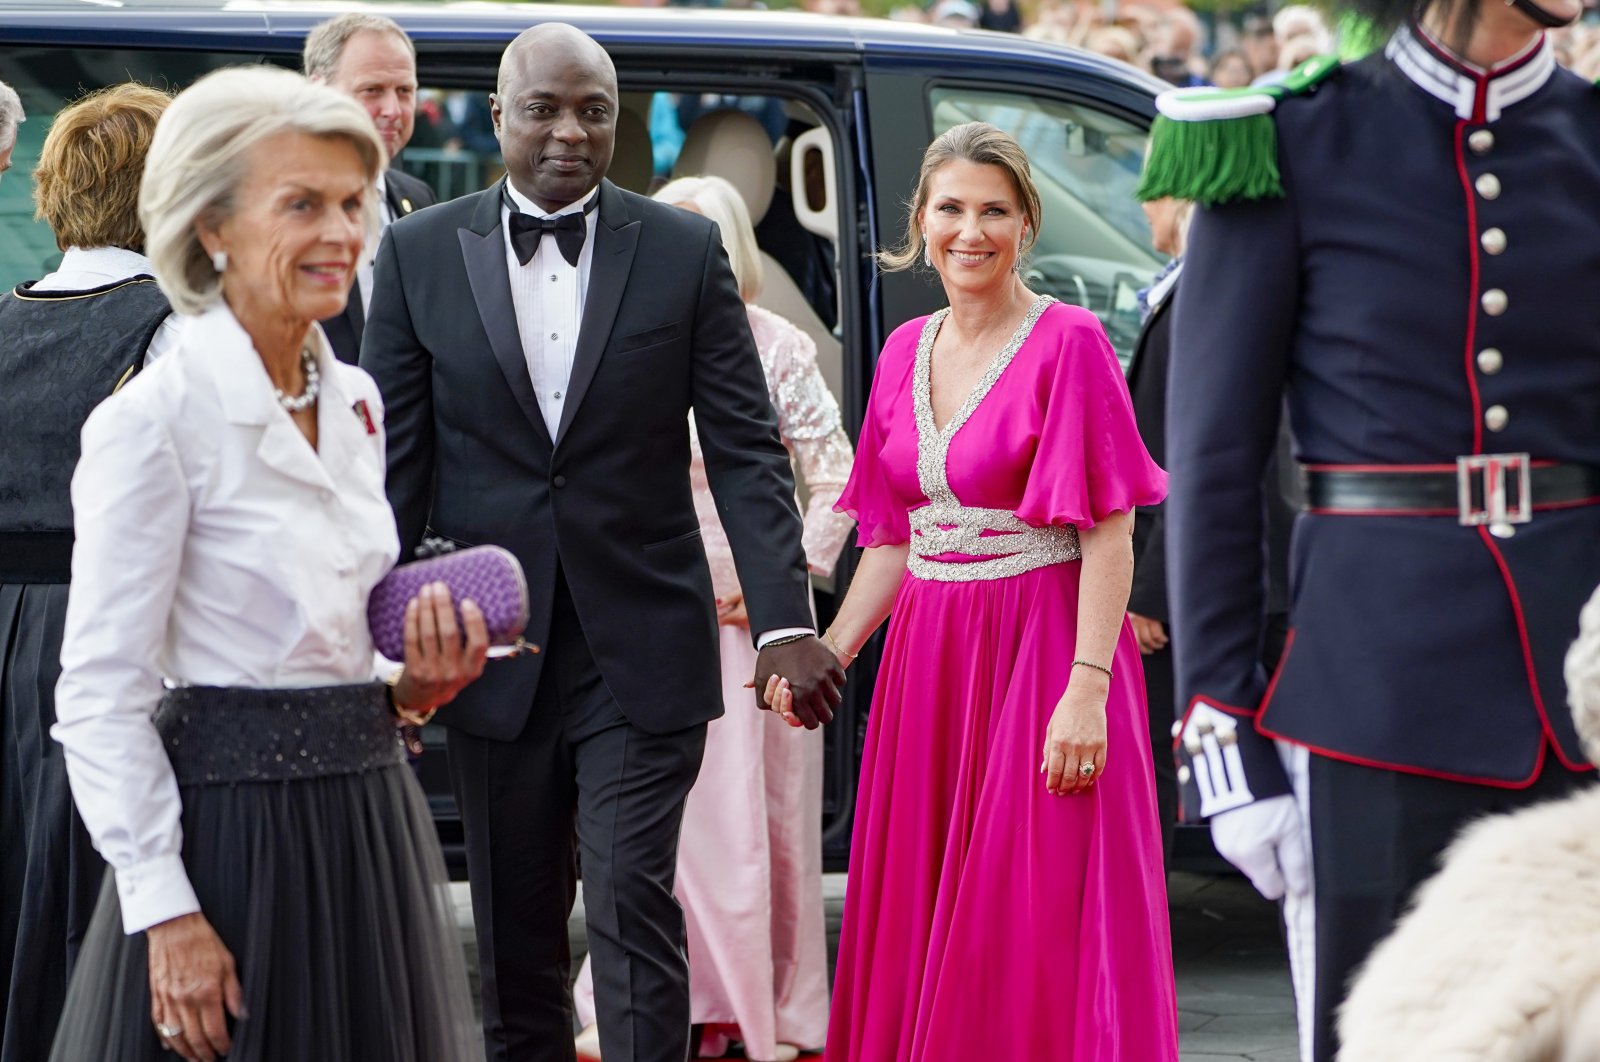 Norway&#039;s Princess Martha Louise and her fiance Durek Verrett arrive at the government&#039;s party event in connection with Princess Ingrid Alexandra&#039;s 18th birthday, which is held at Deichman Bjoervika, Oslo&#039;s main library, Norway, June 16, 2022. (AP Photo)